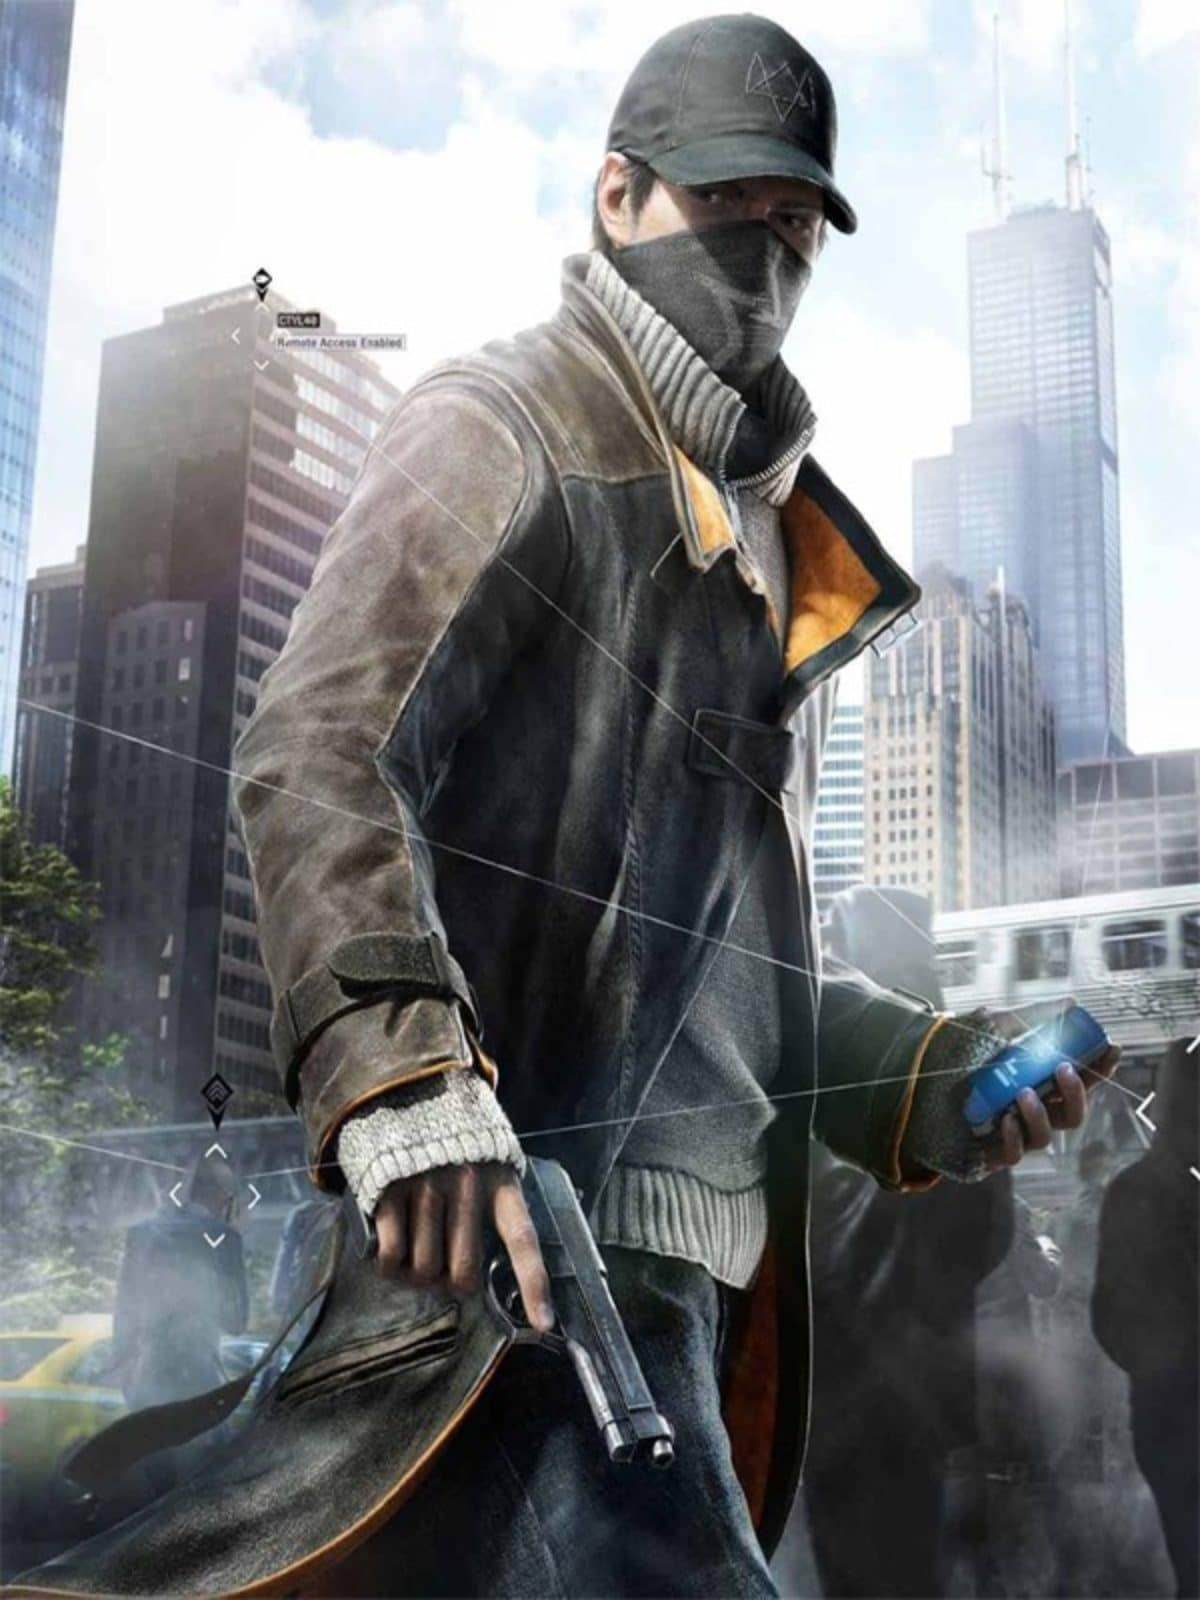 Watch Dogs Aiden Pearce Leather Coat